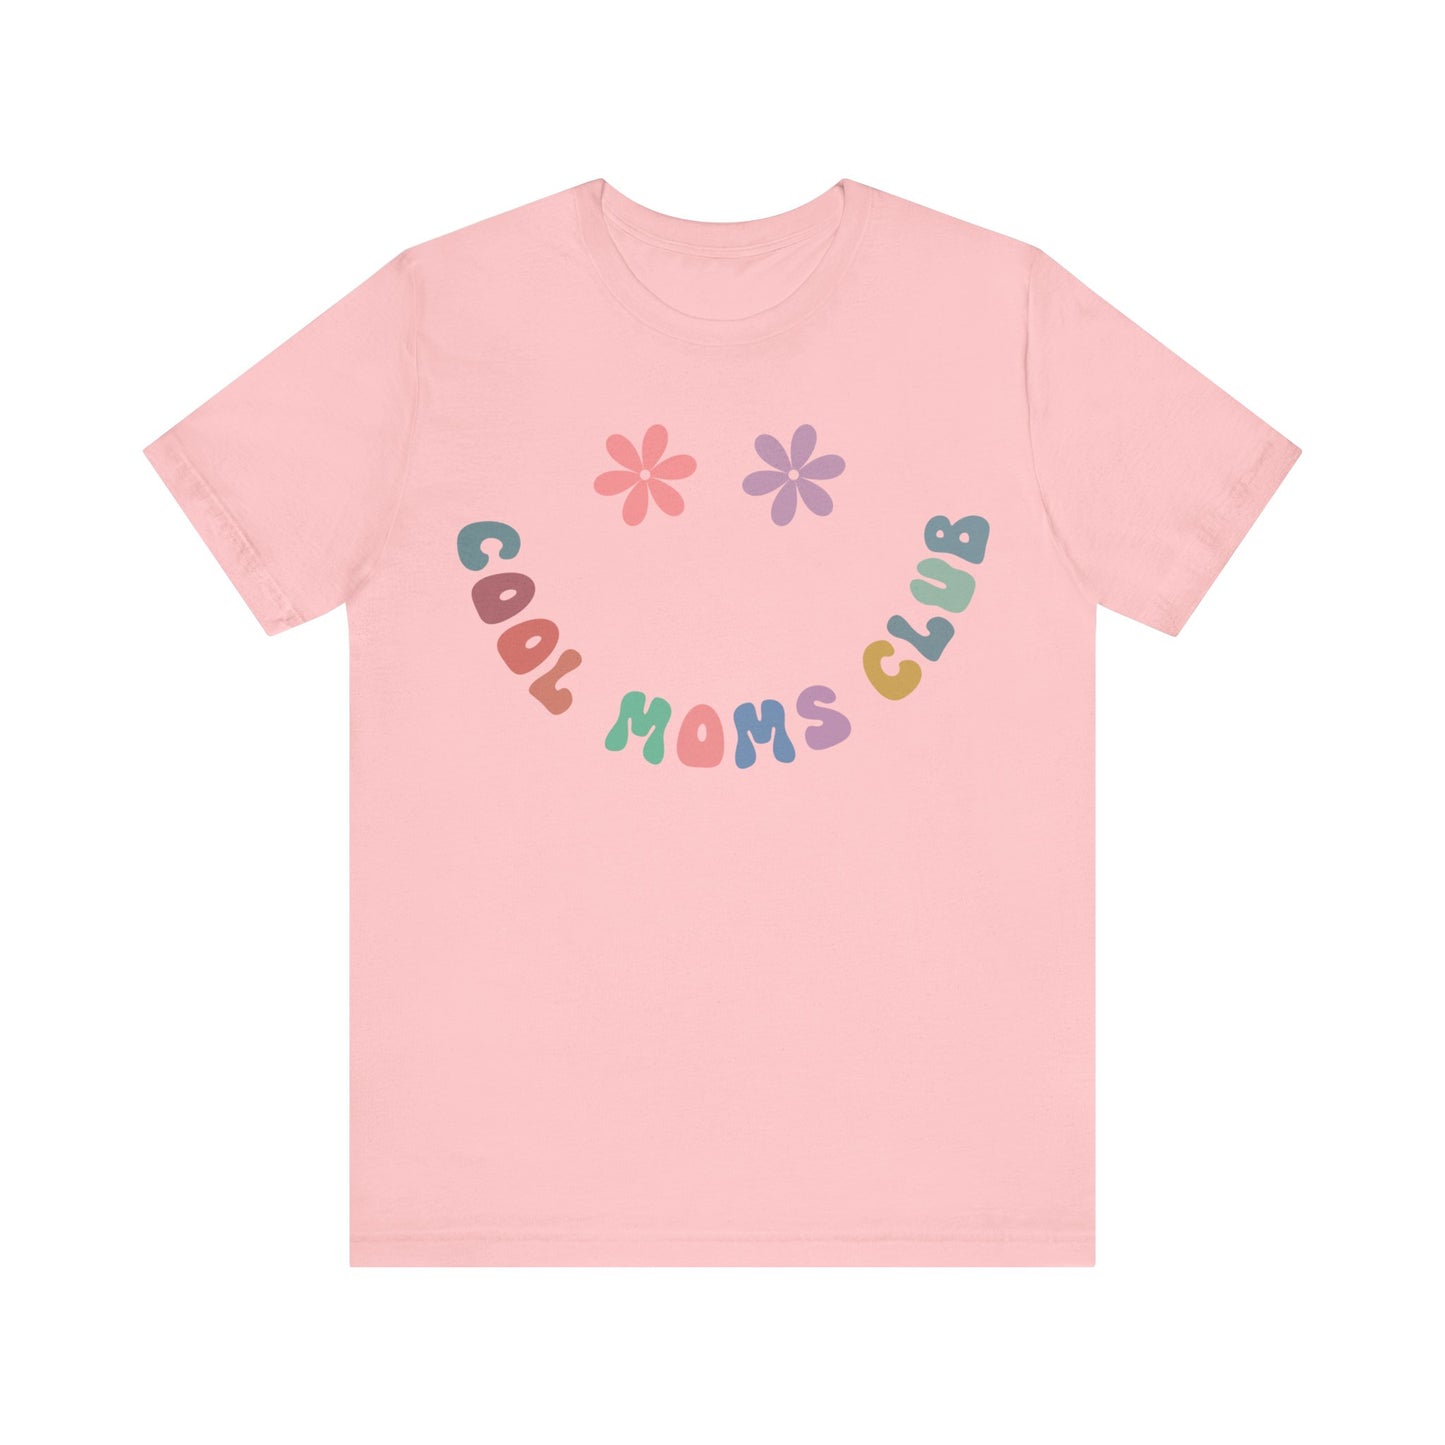 Cool Moms Club Shirt, Happy Mother's Day Gift, Nana Shirt, Mom Shirt, Funny Mom Tshirt, Mama Shirt